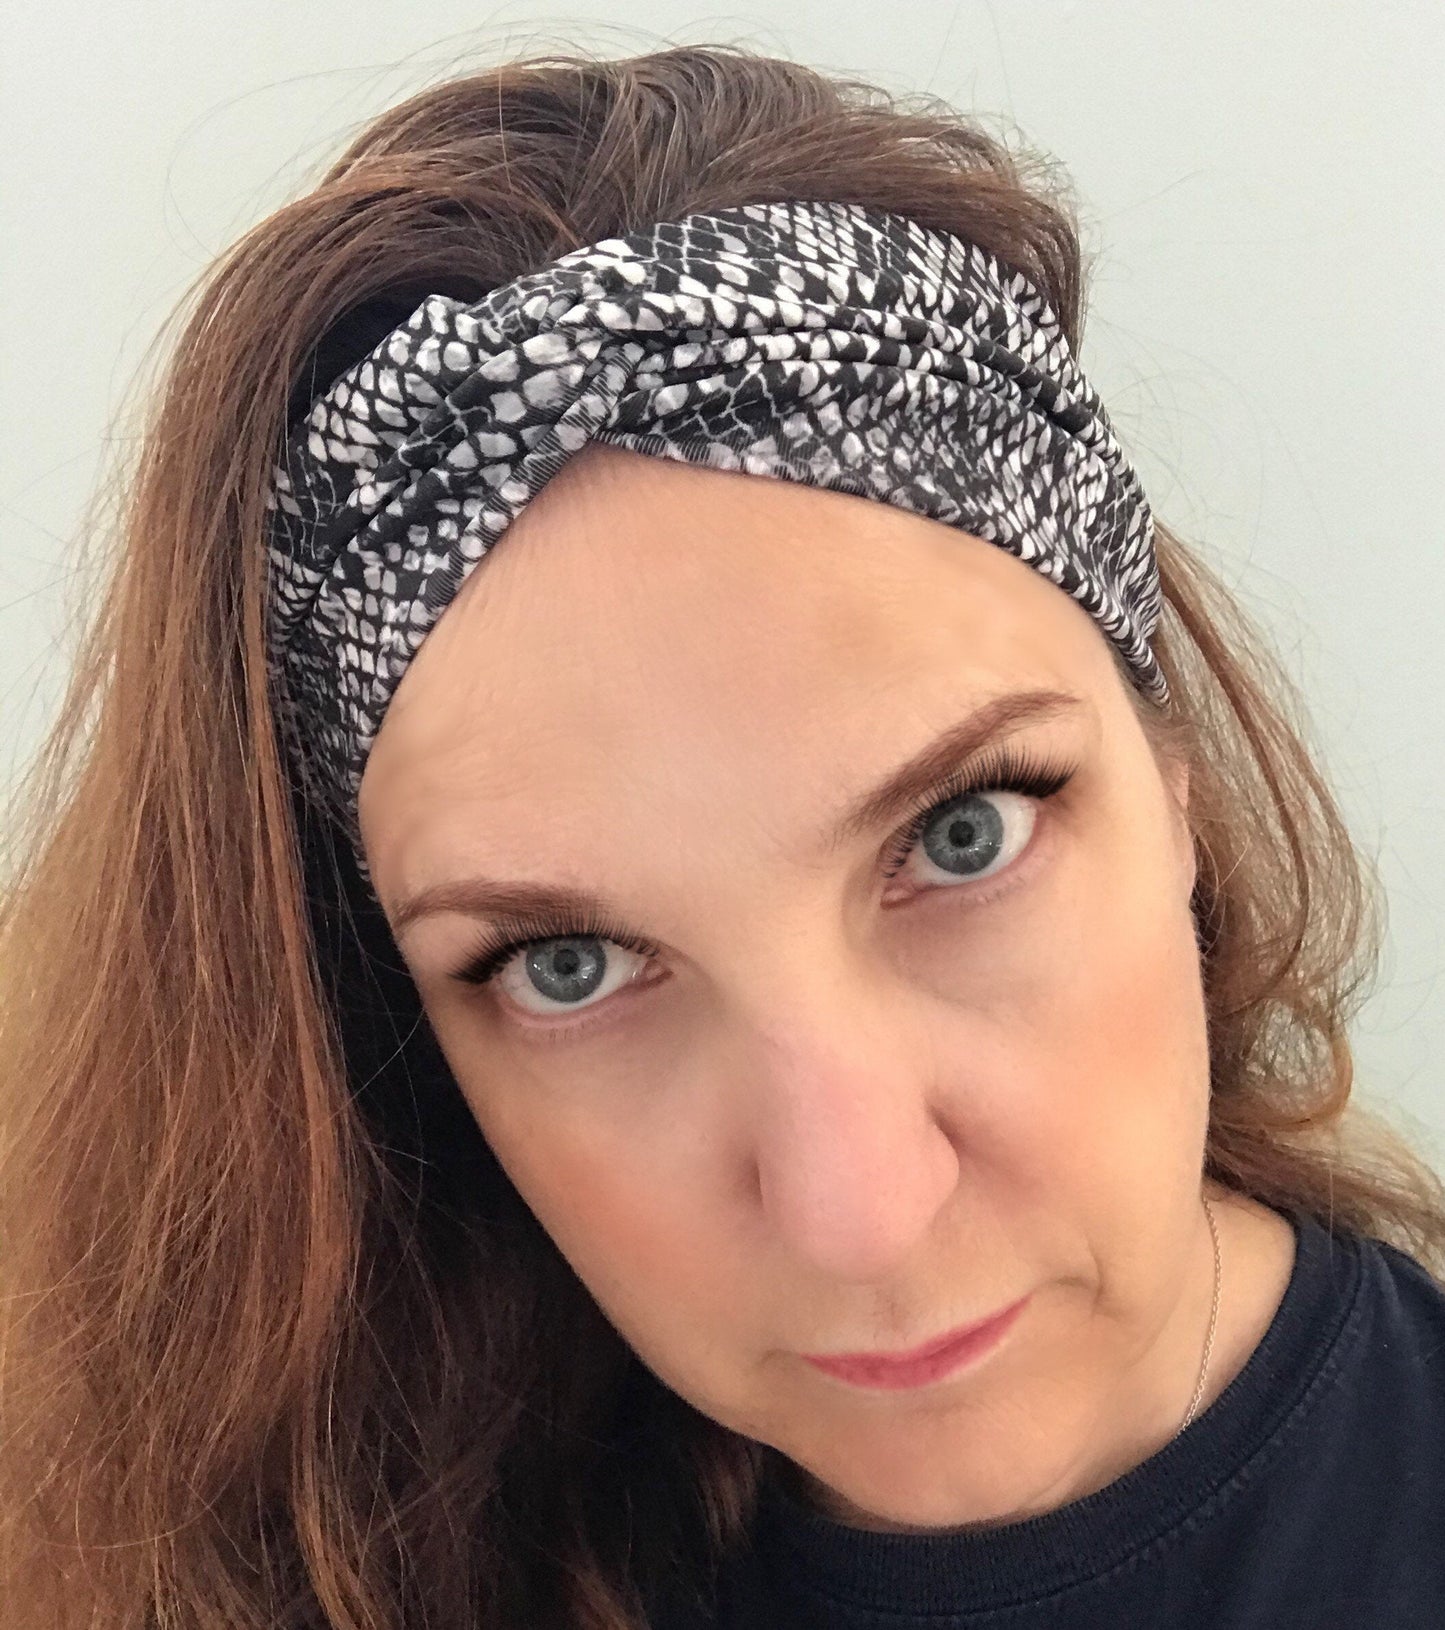 Black and Gray Snakeskin Pattern Lycra Headband, Reversible Faux Knot, Super Stretchy, Comfortable and Quick Drying. Made in USA